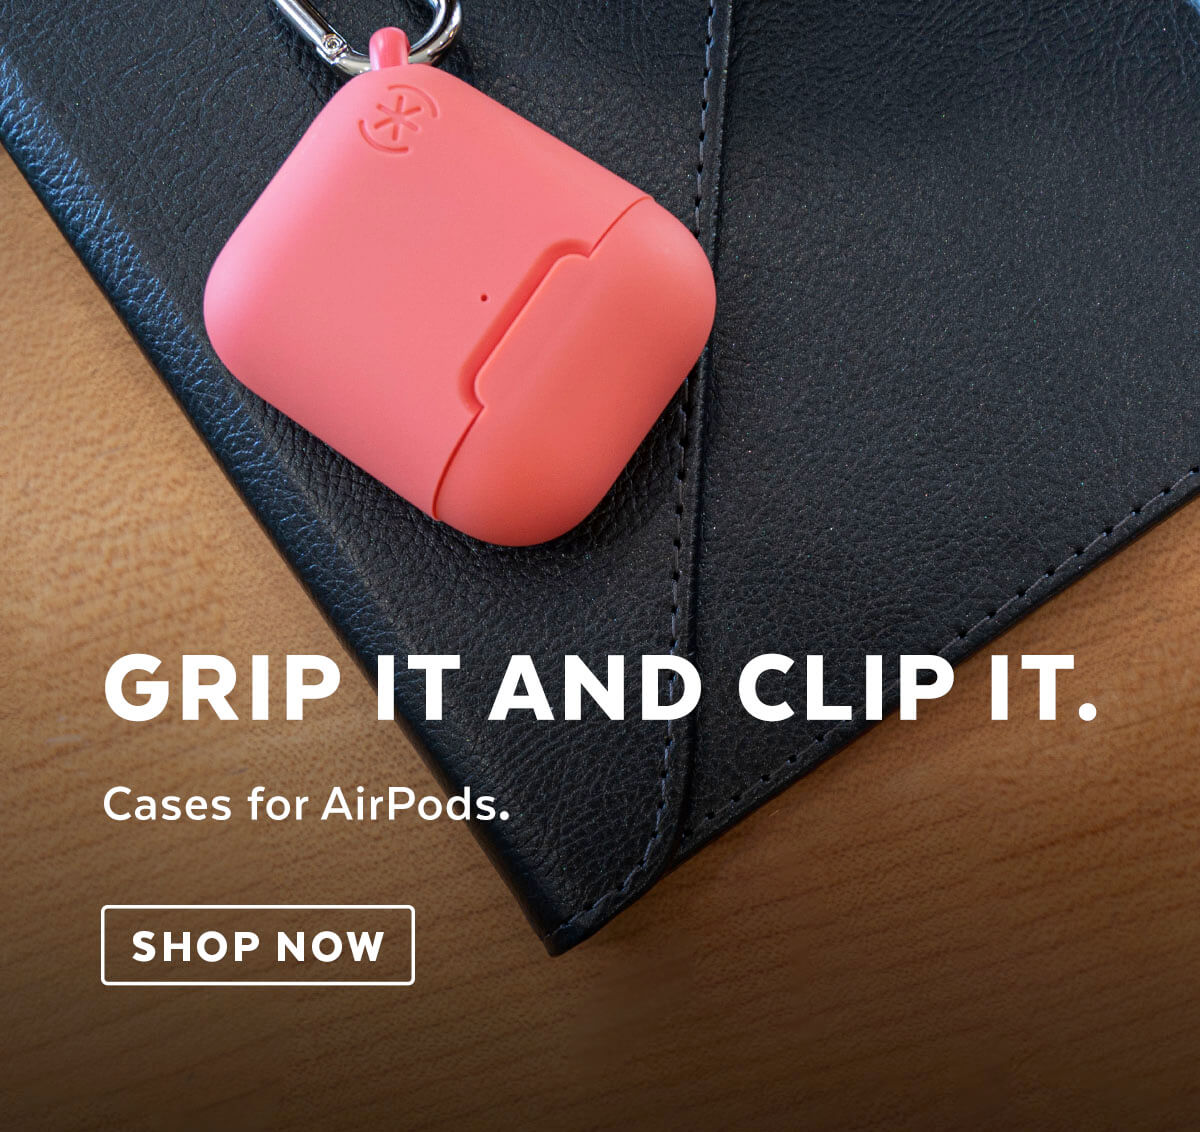 Grip it and clip it. Cases for AirPods. Shop now.